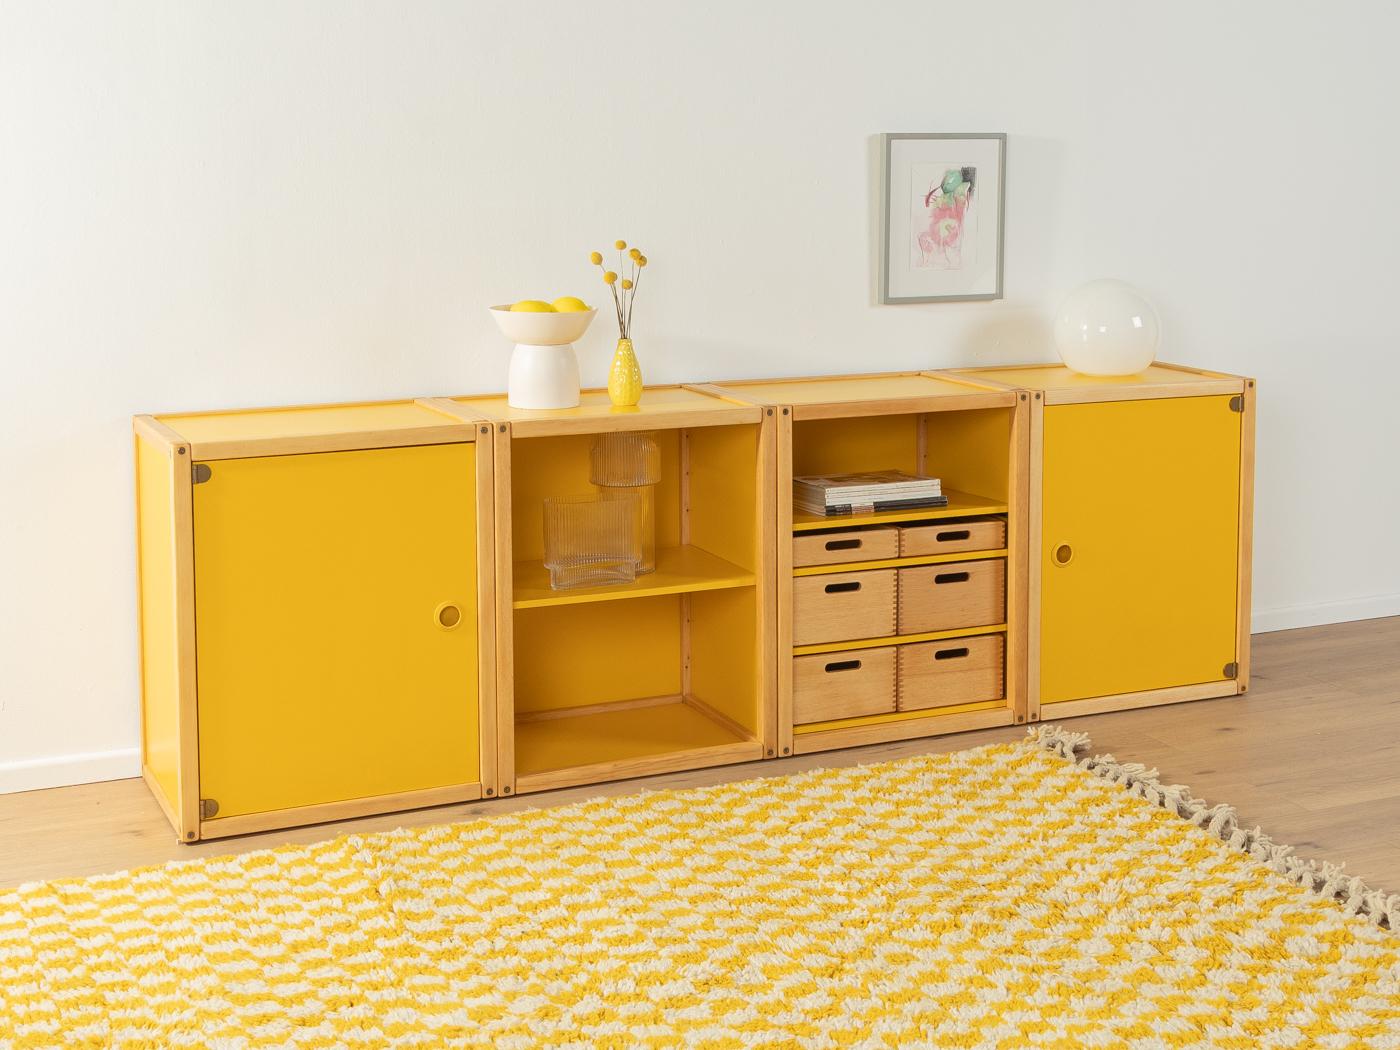 Four freestanding chests of drawers from the 